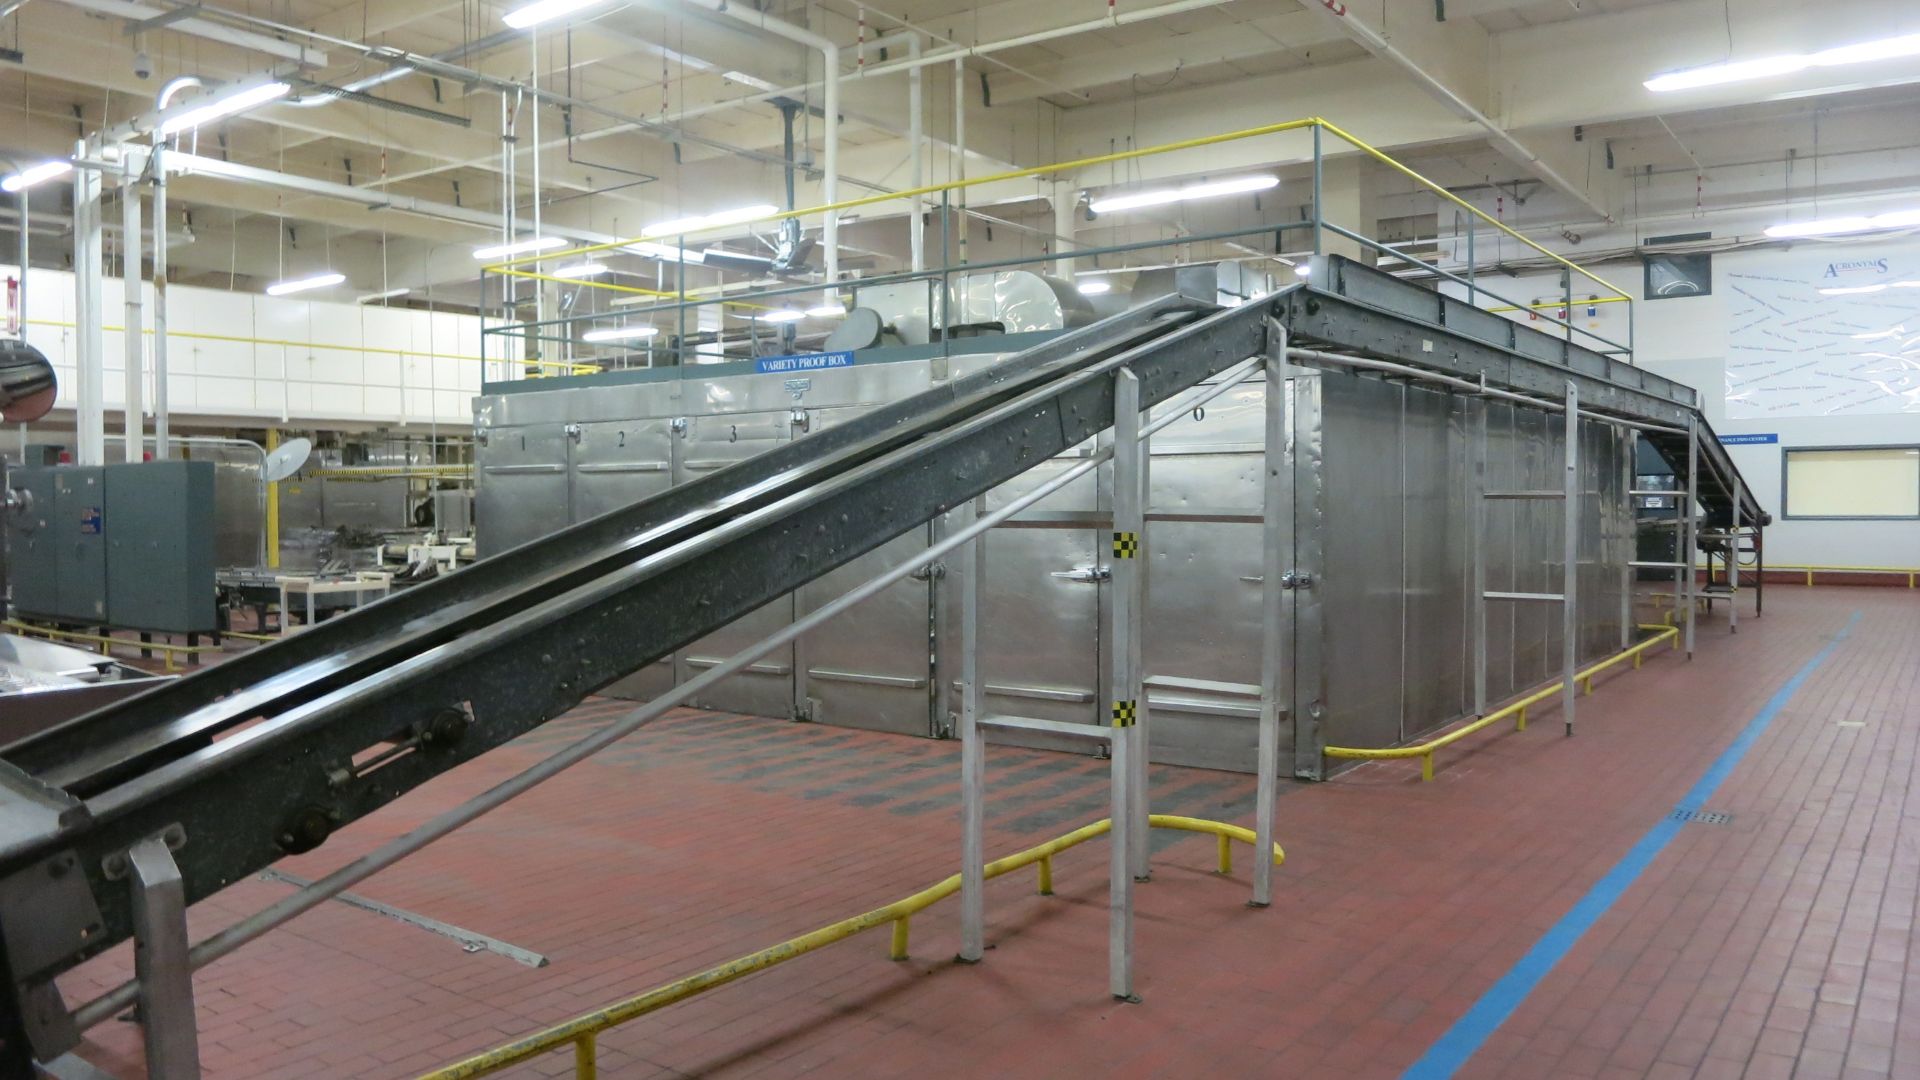 [Lot] Pan return and feed conveyor, approx. 425 running, various types (belt, roller, magnetic) with - Image 6 of 7